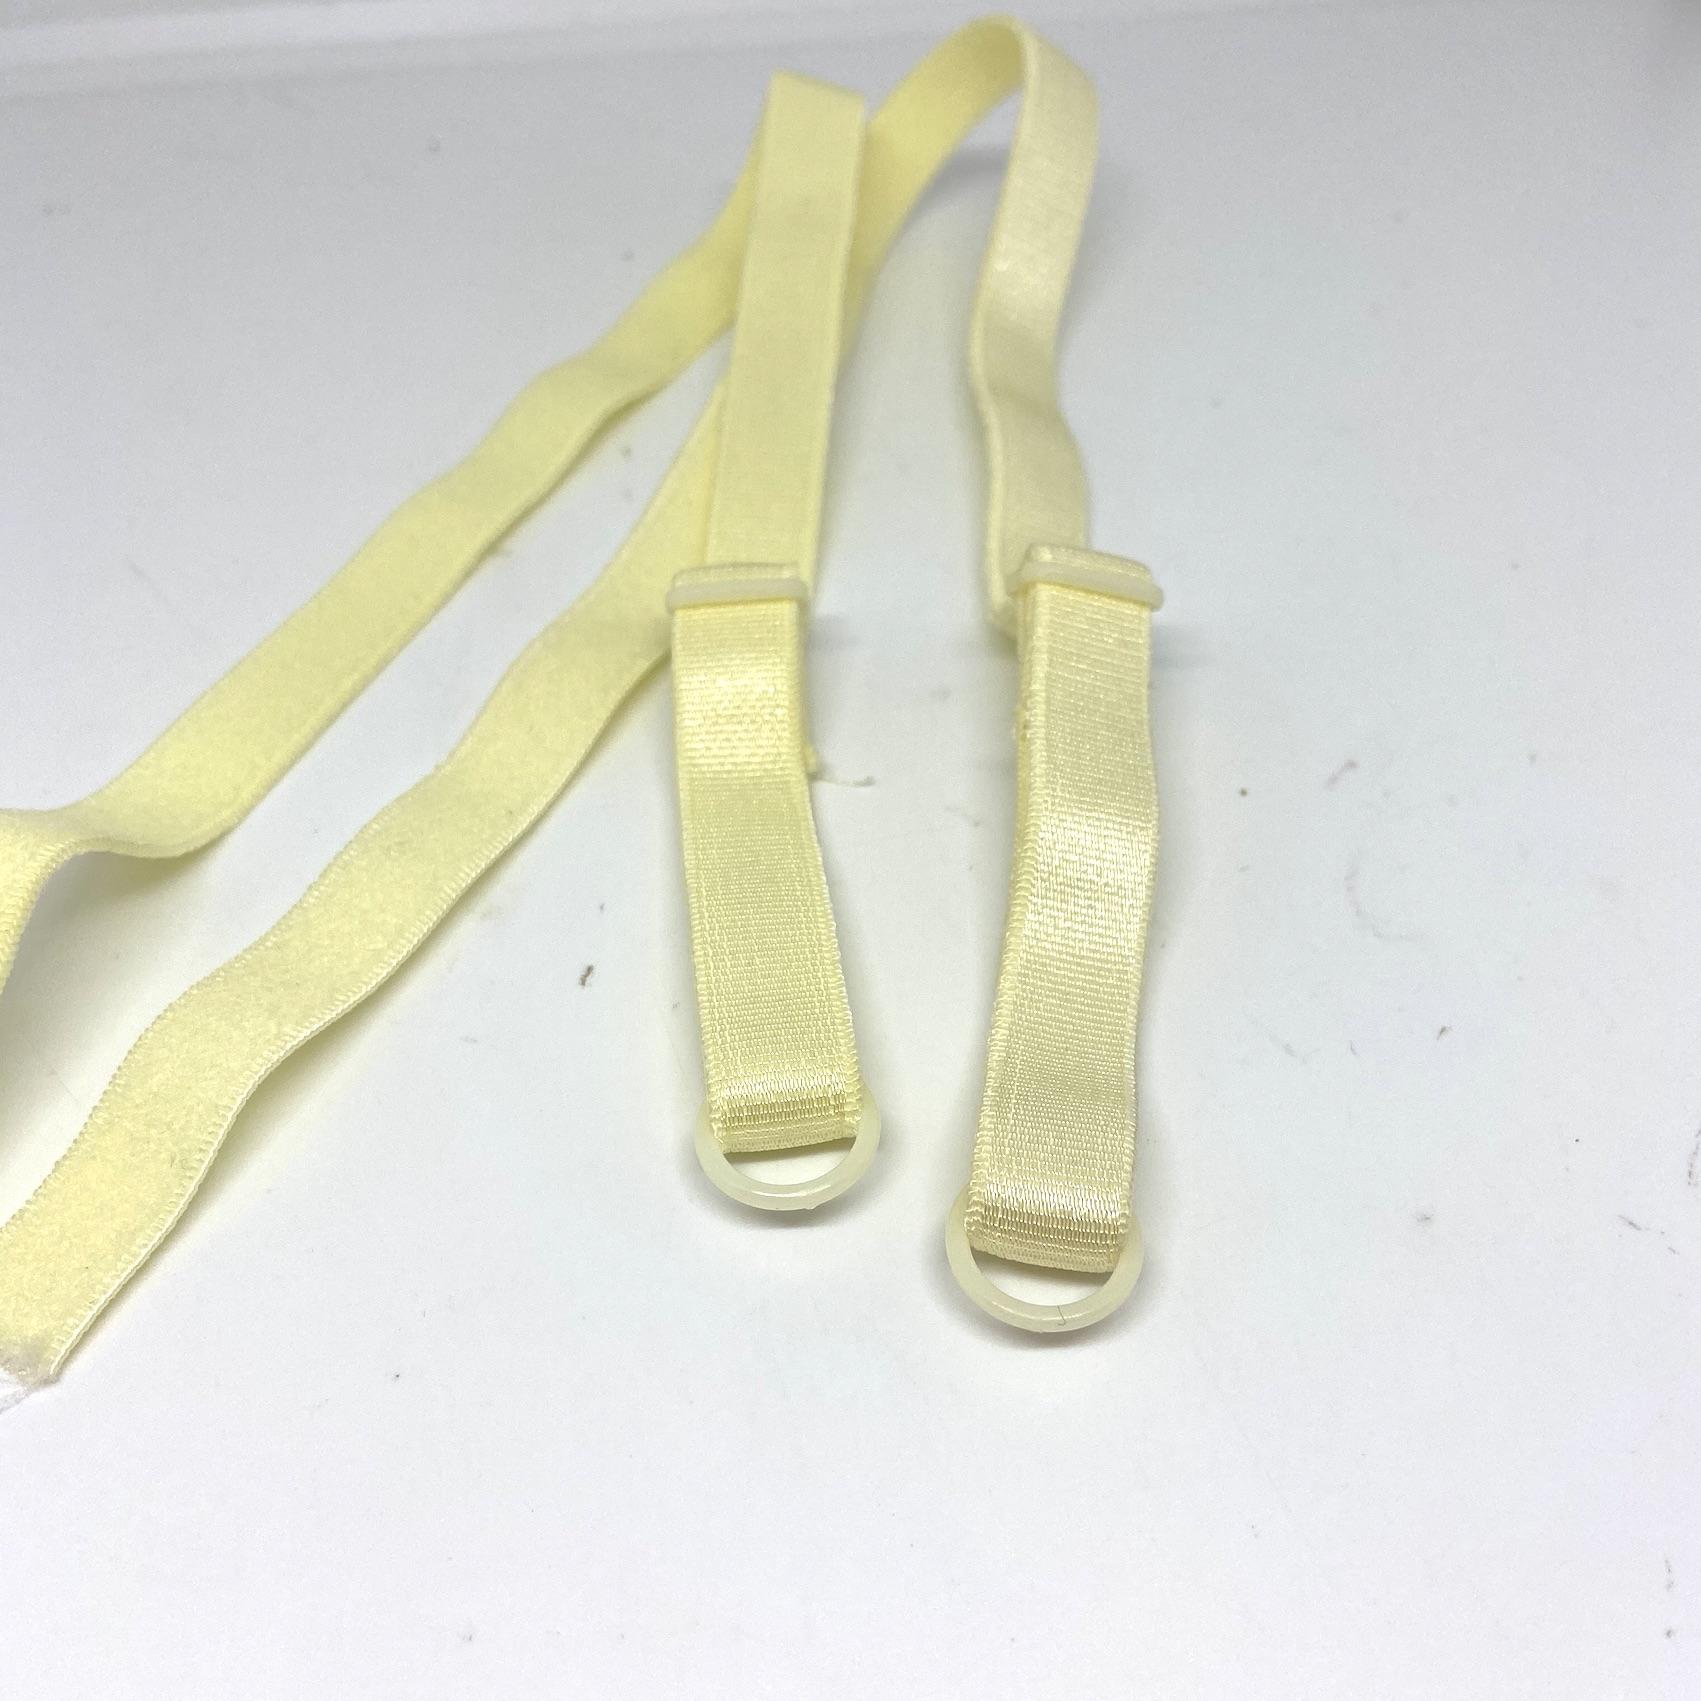 Bra Straps - Hook on - Replacement - 10mm - Metal Hooks, plastic 'Pearl'  Sliders - OFF-WHITE